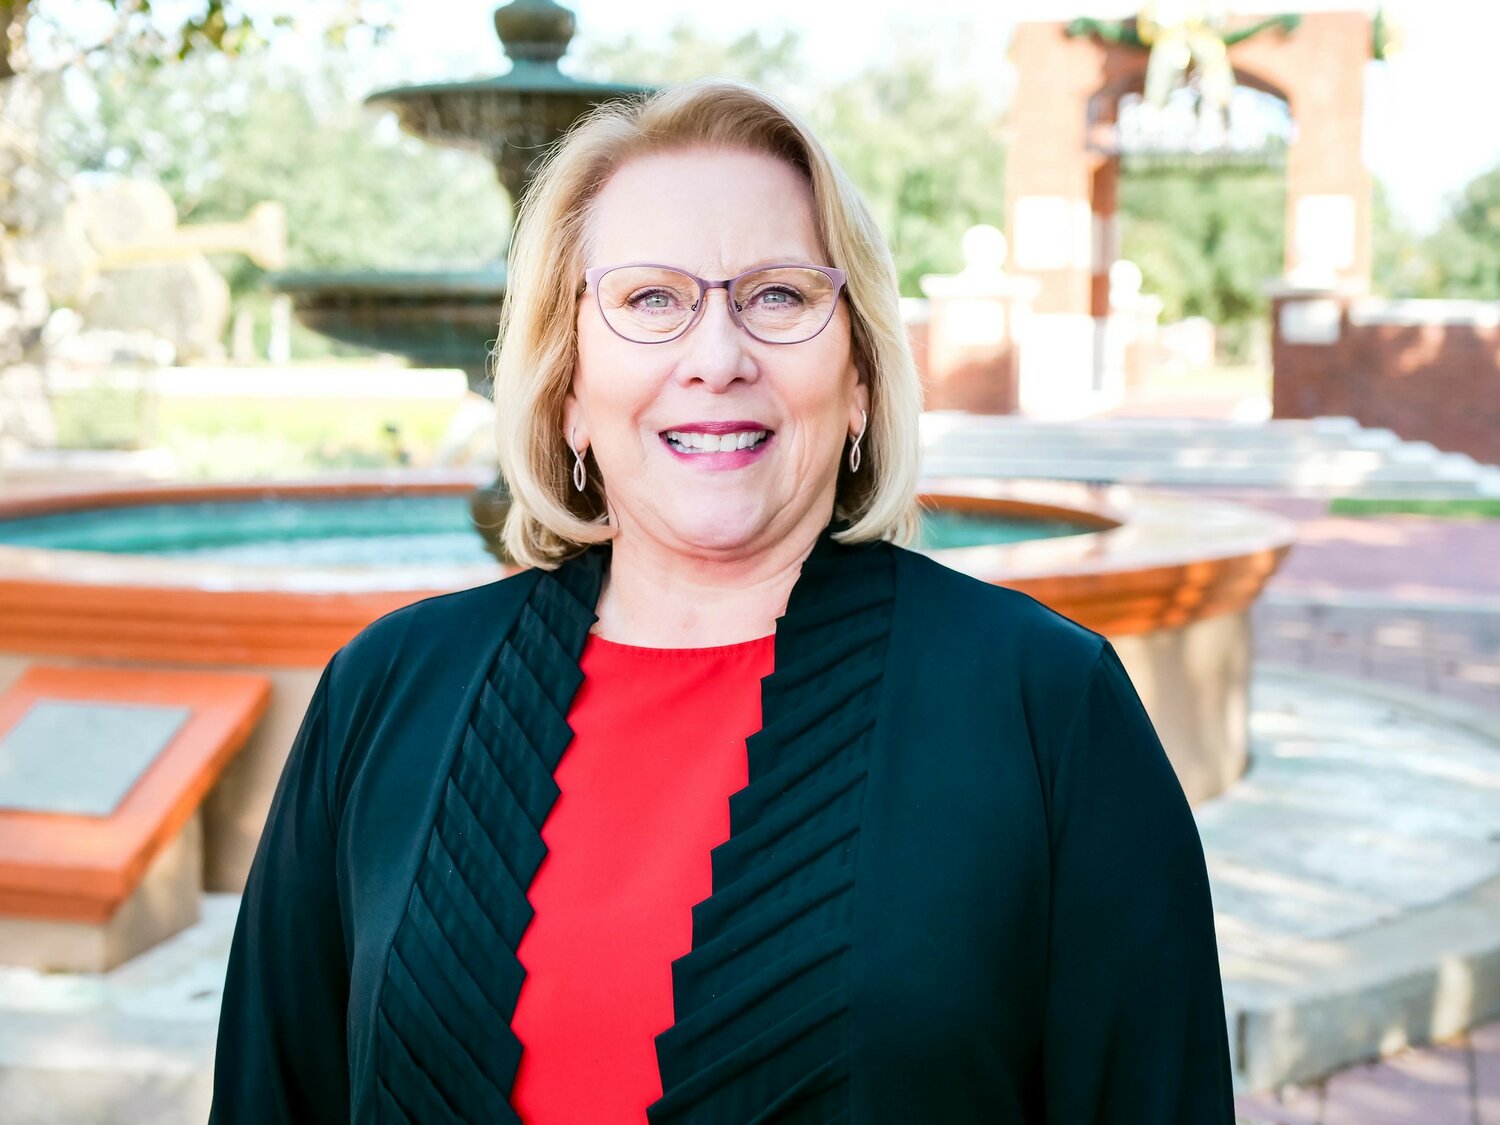 Donna Watts, South Baldwin Chamber of Commerce president/CEO, has been an instrumental figure in the growth of the South Baldwin Chamber of Commerce (SBCC) since 1997.